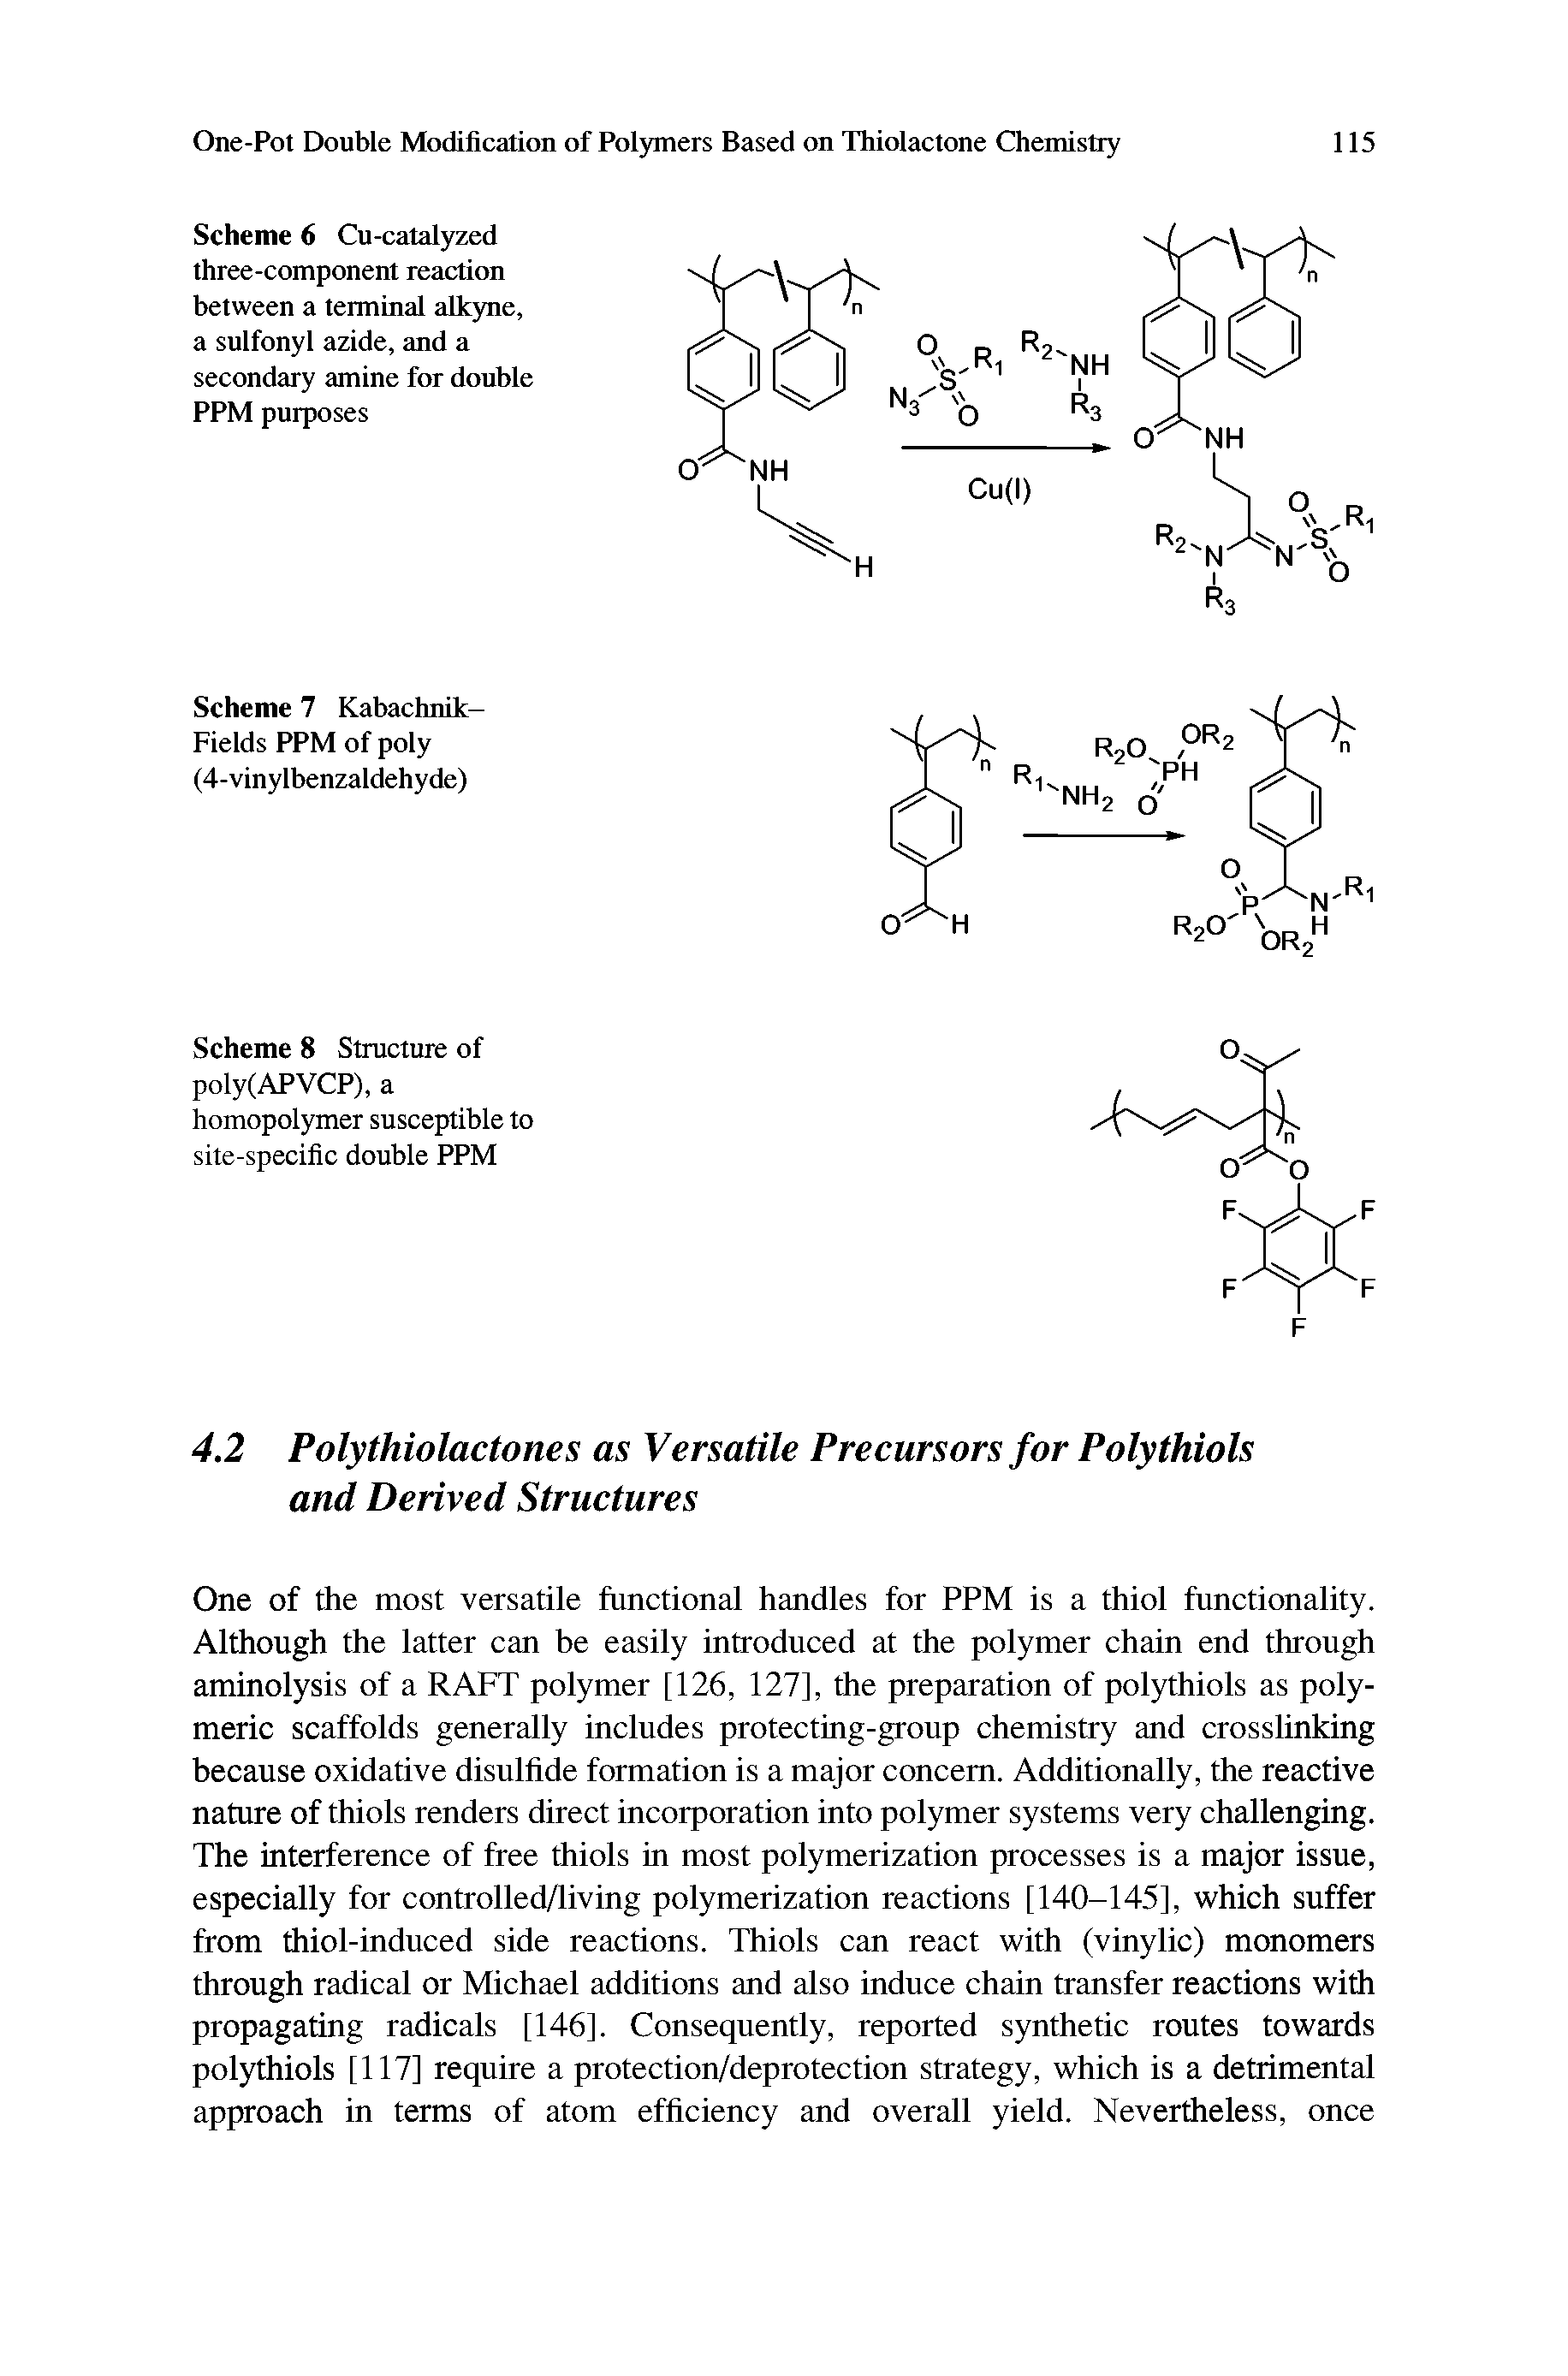 Scheme 6 Cu-catalyzed three-component reaction between a terminal alkyne, a sulfonyl azide, and a secondary amine for double PPM purposes...